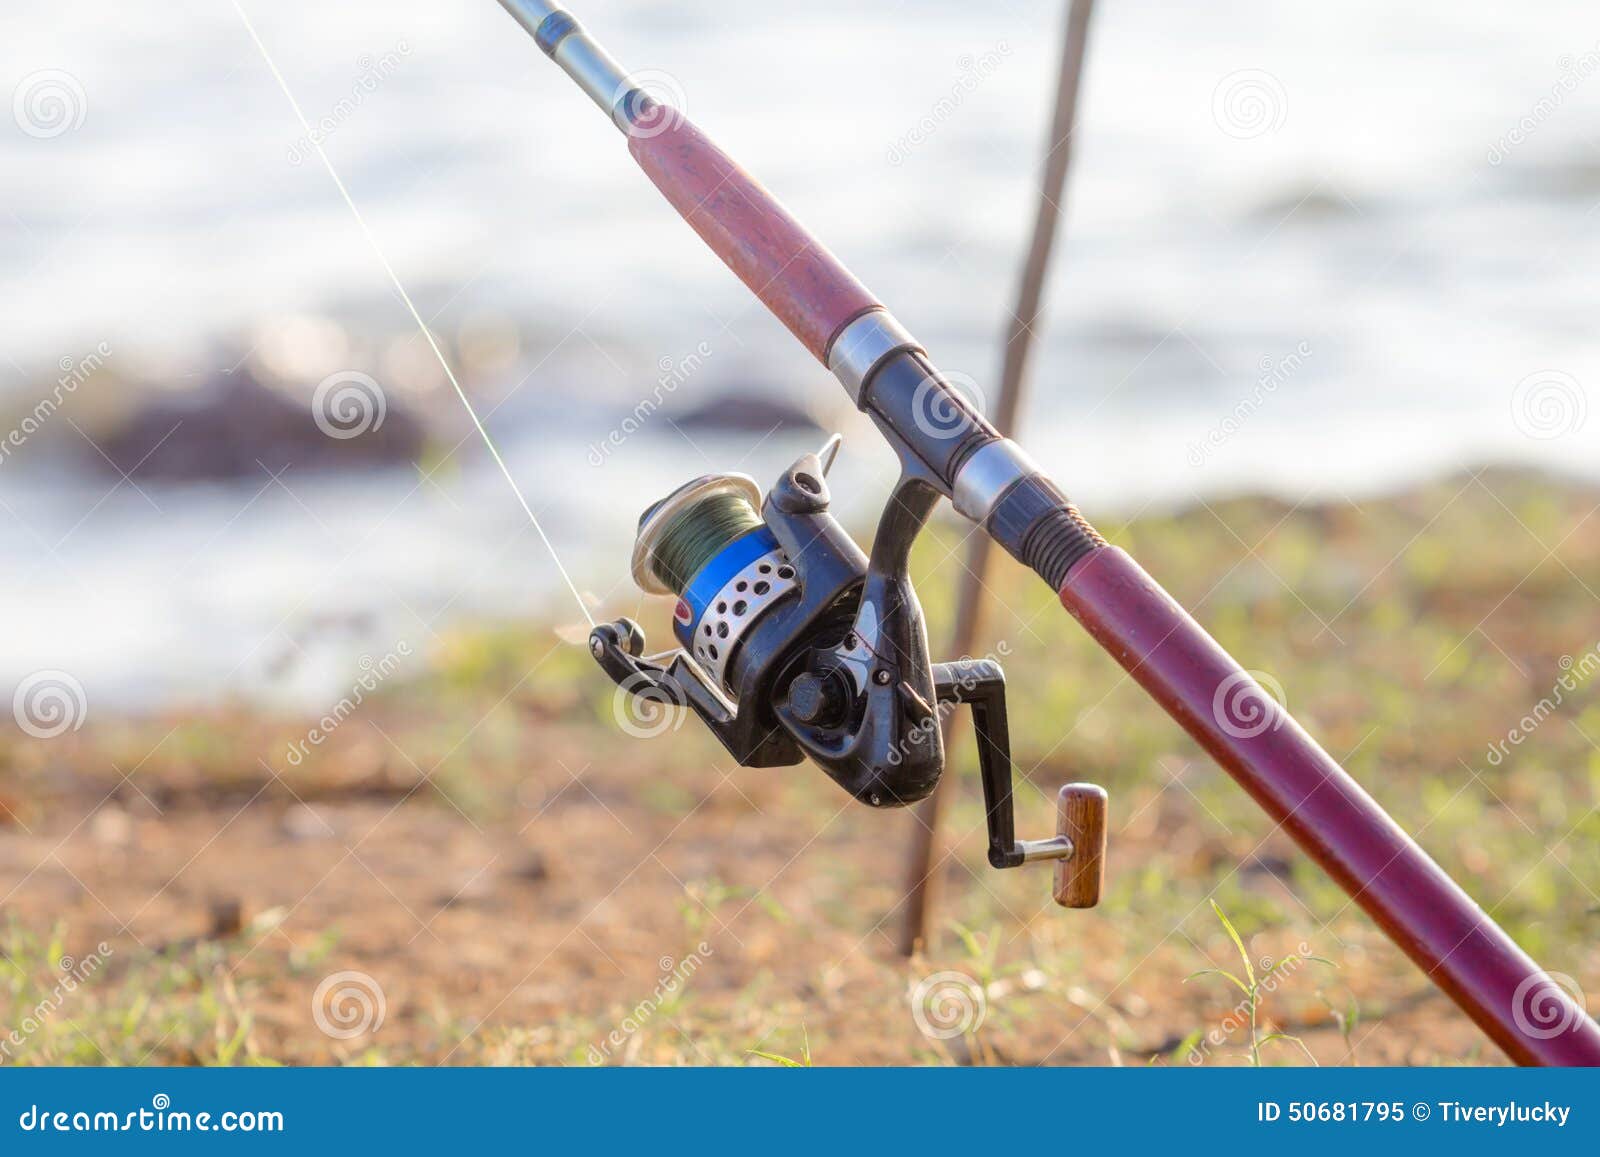 https://thumbs.dreamstime.com/z/fishing-pole-close-up-spinning-50681795.jpg